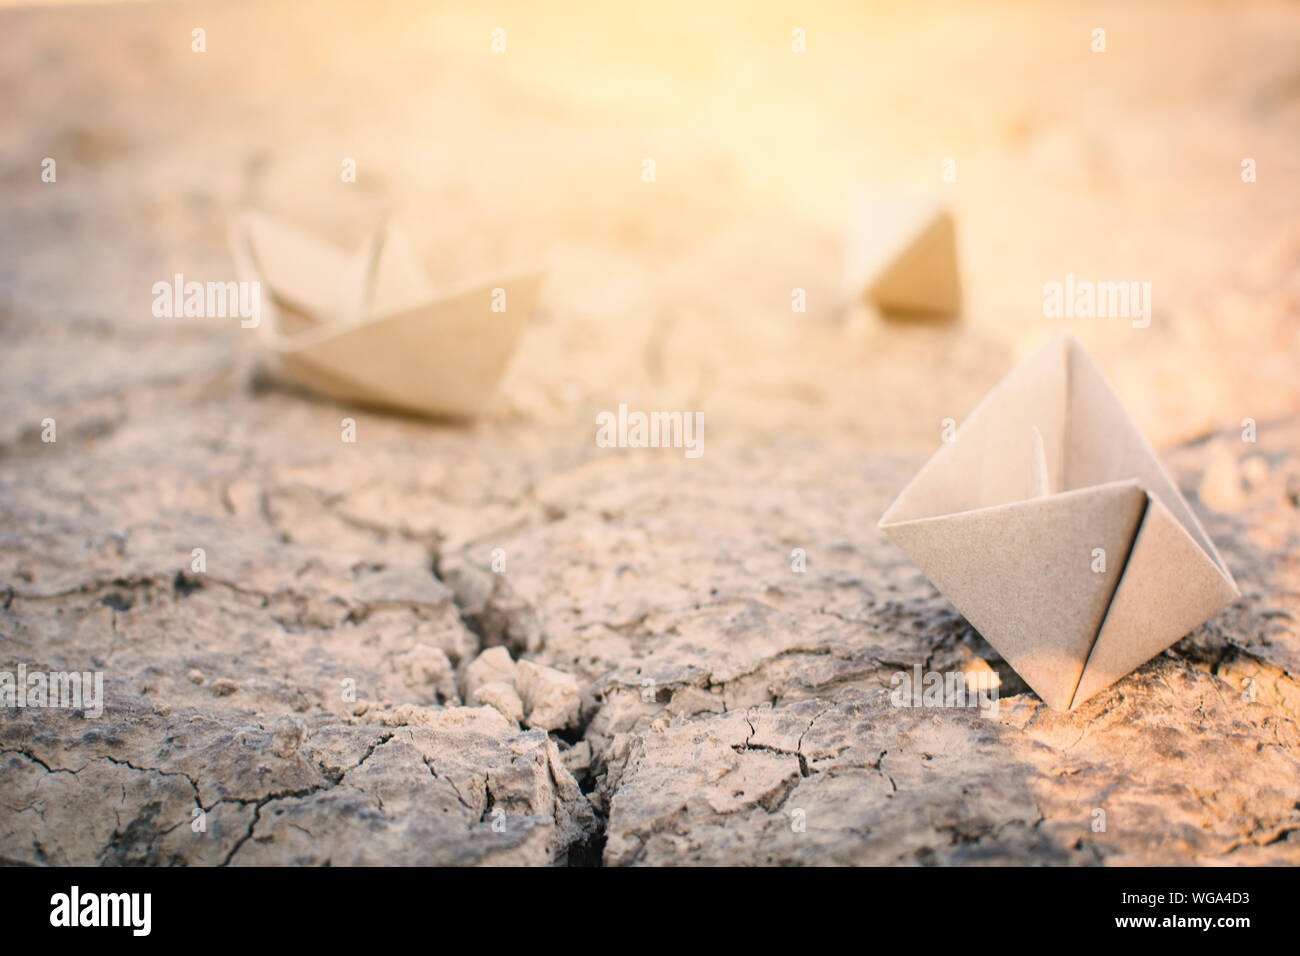 Close-up Of Paper Boat On Ground Stock Photo